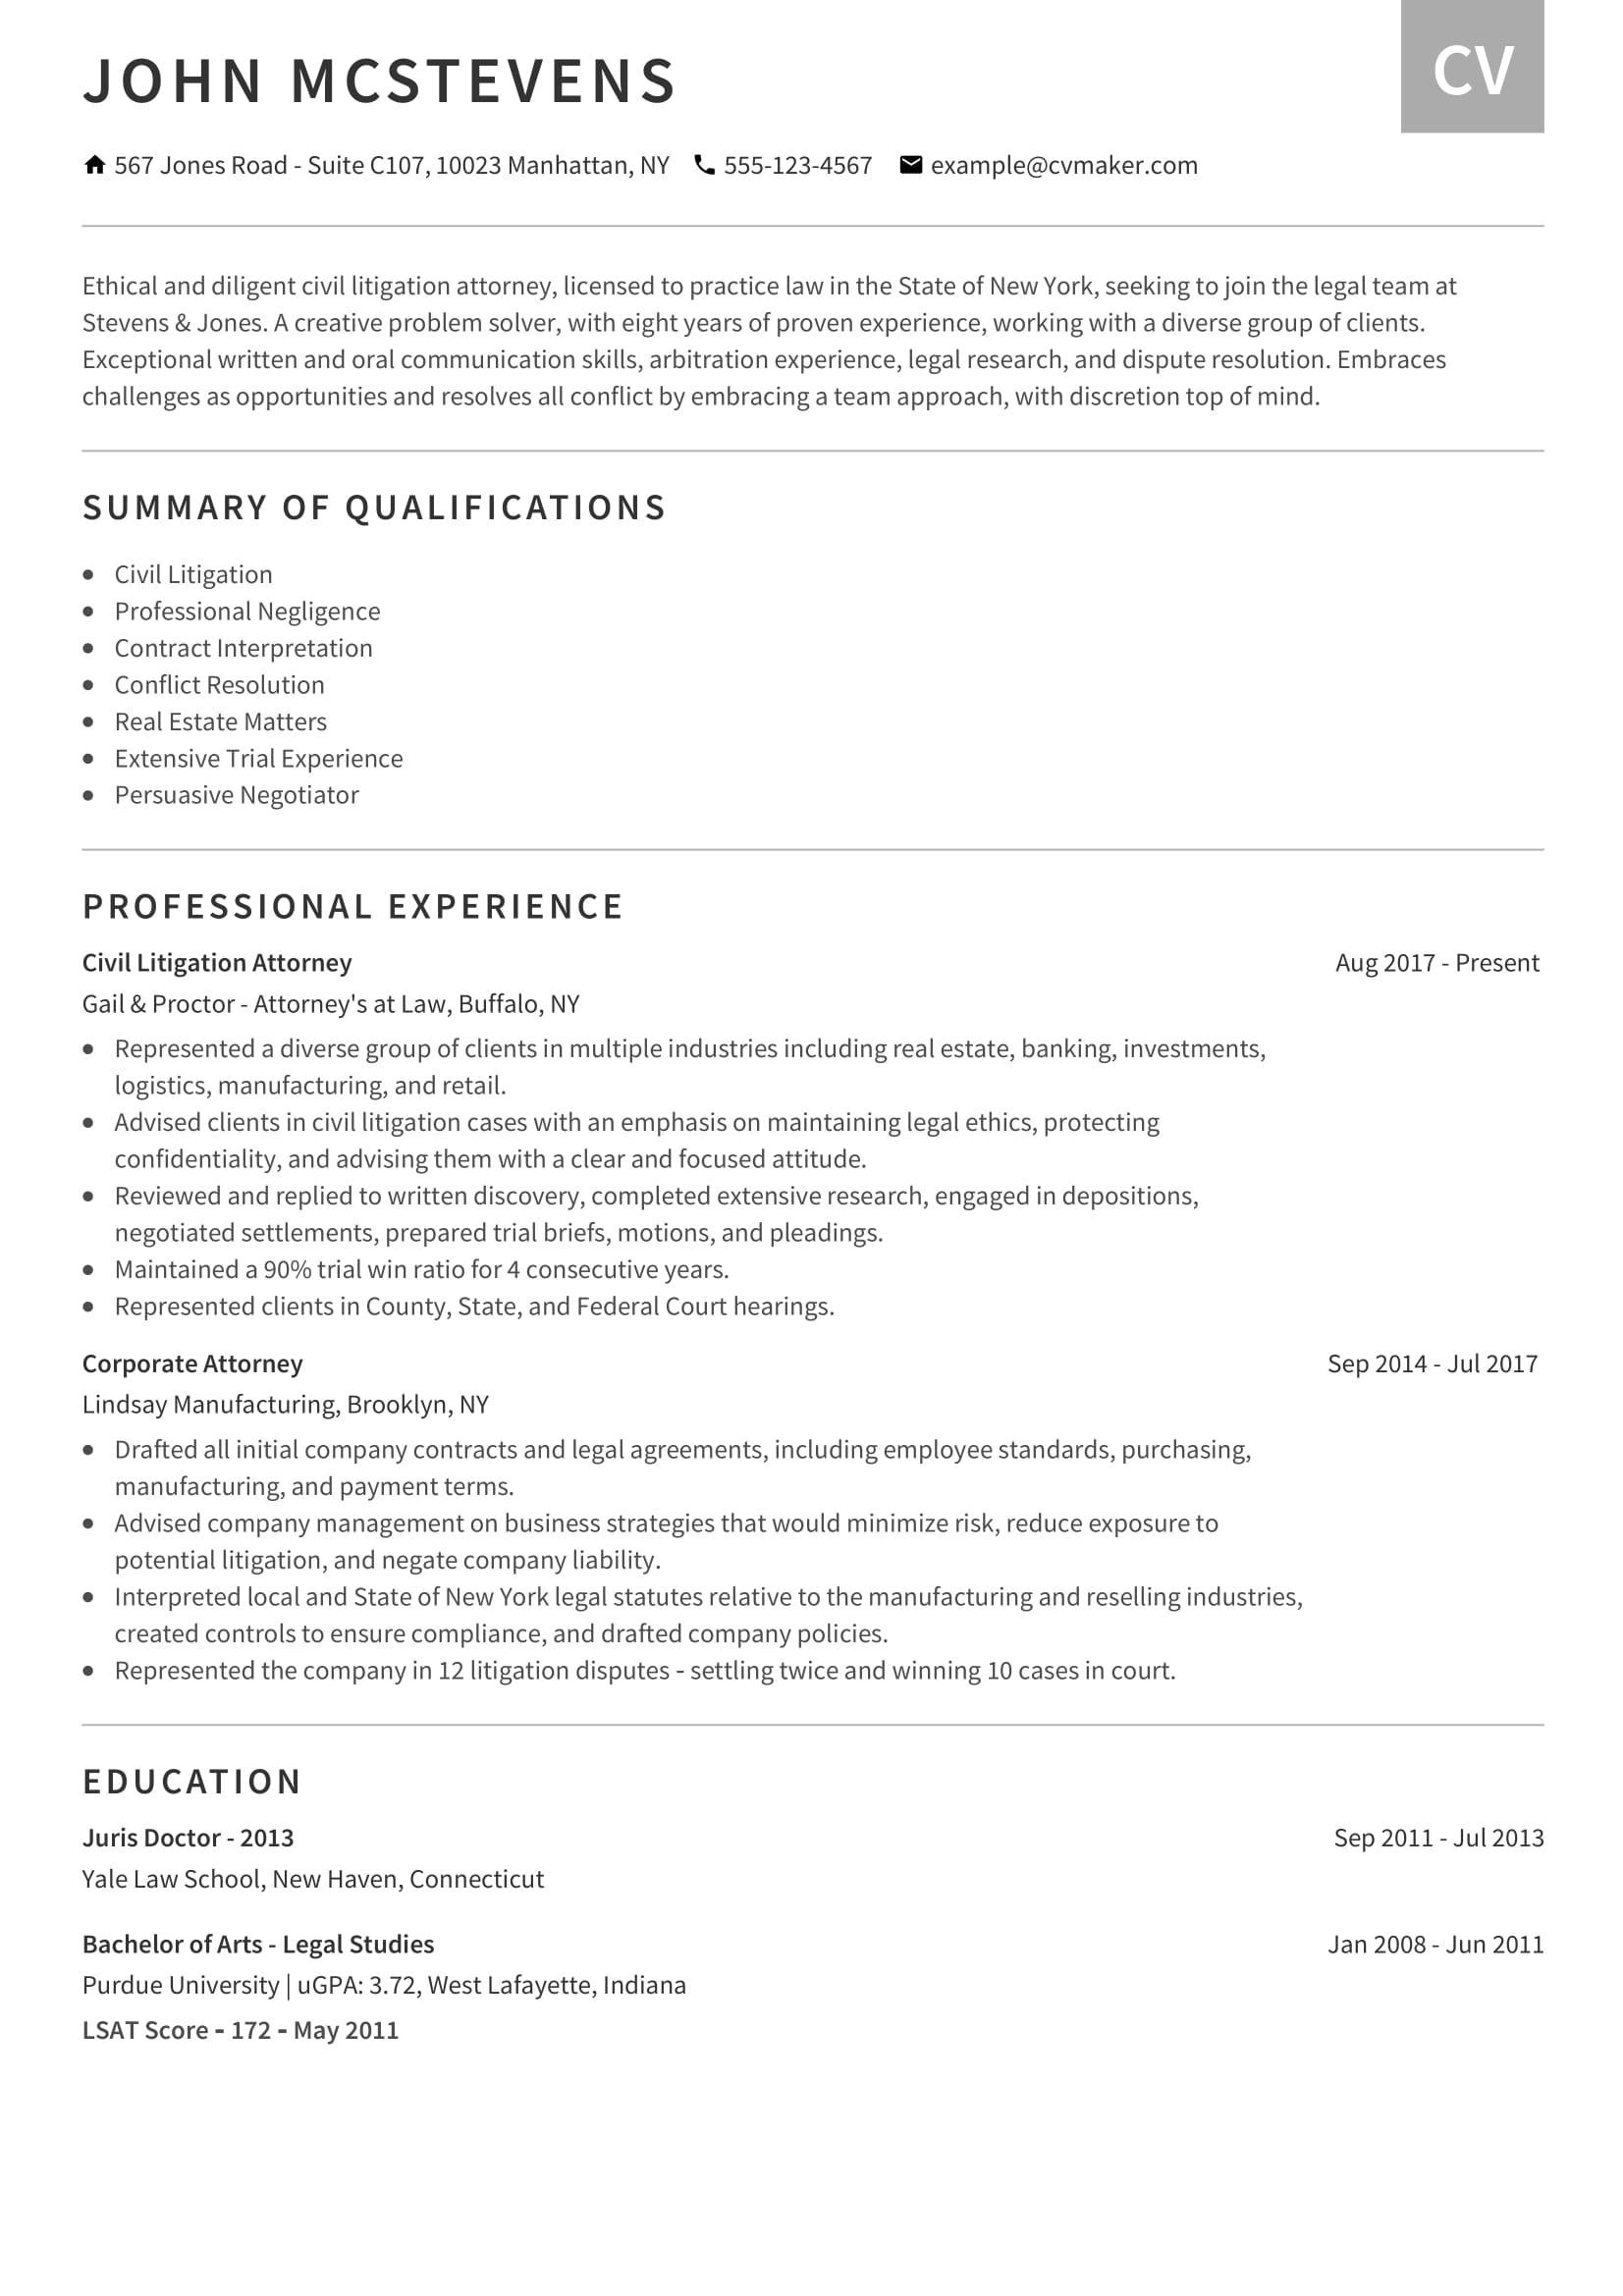 Legal Writing for Lawyers Sample Resume attorney Resume Example & Lawyer Resume Writing Tips 2021 …